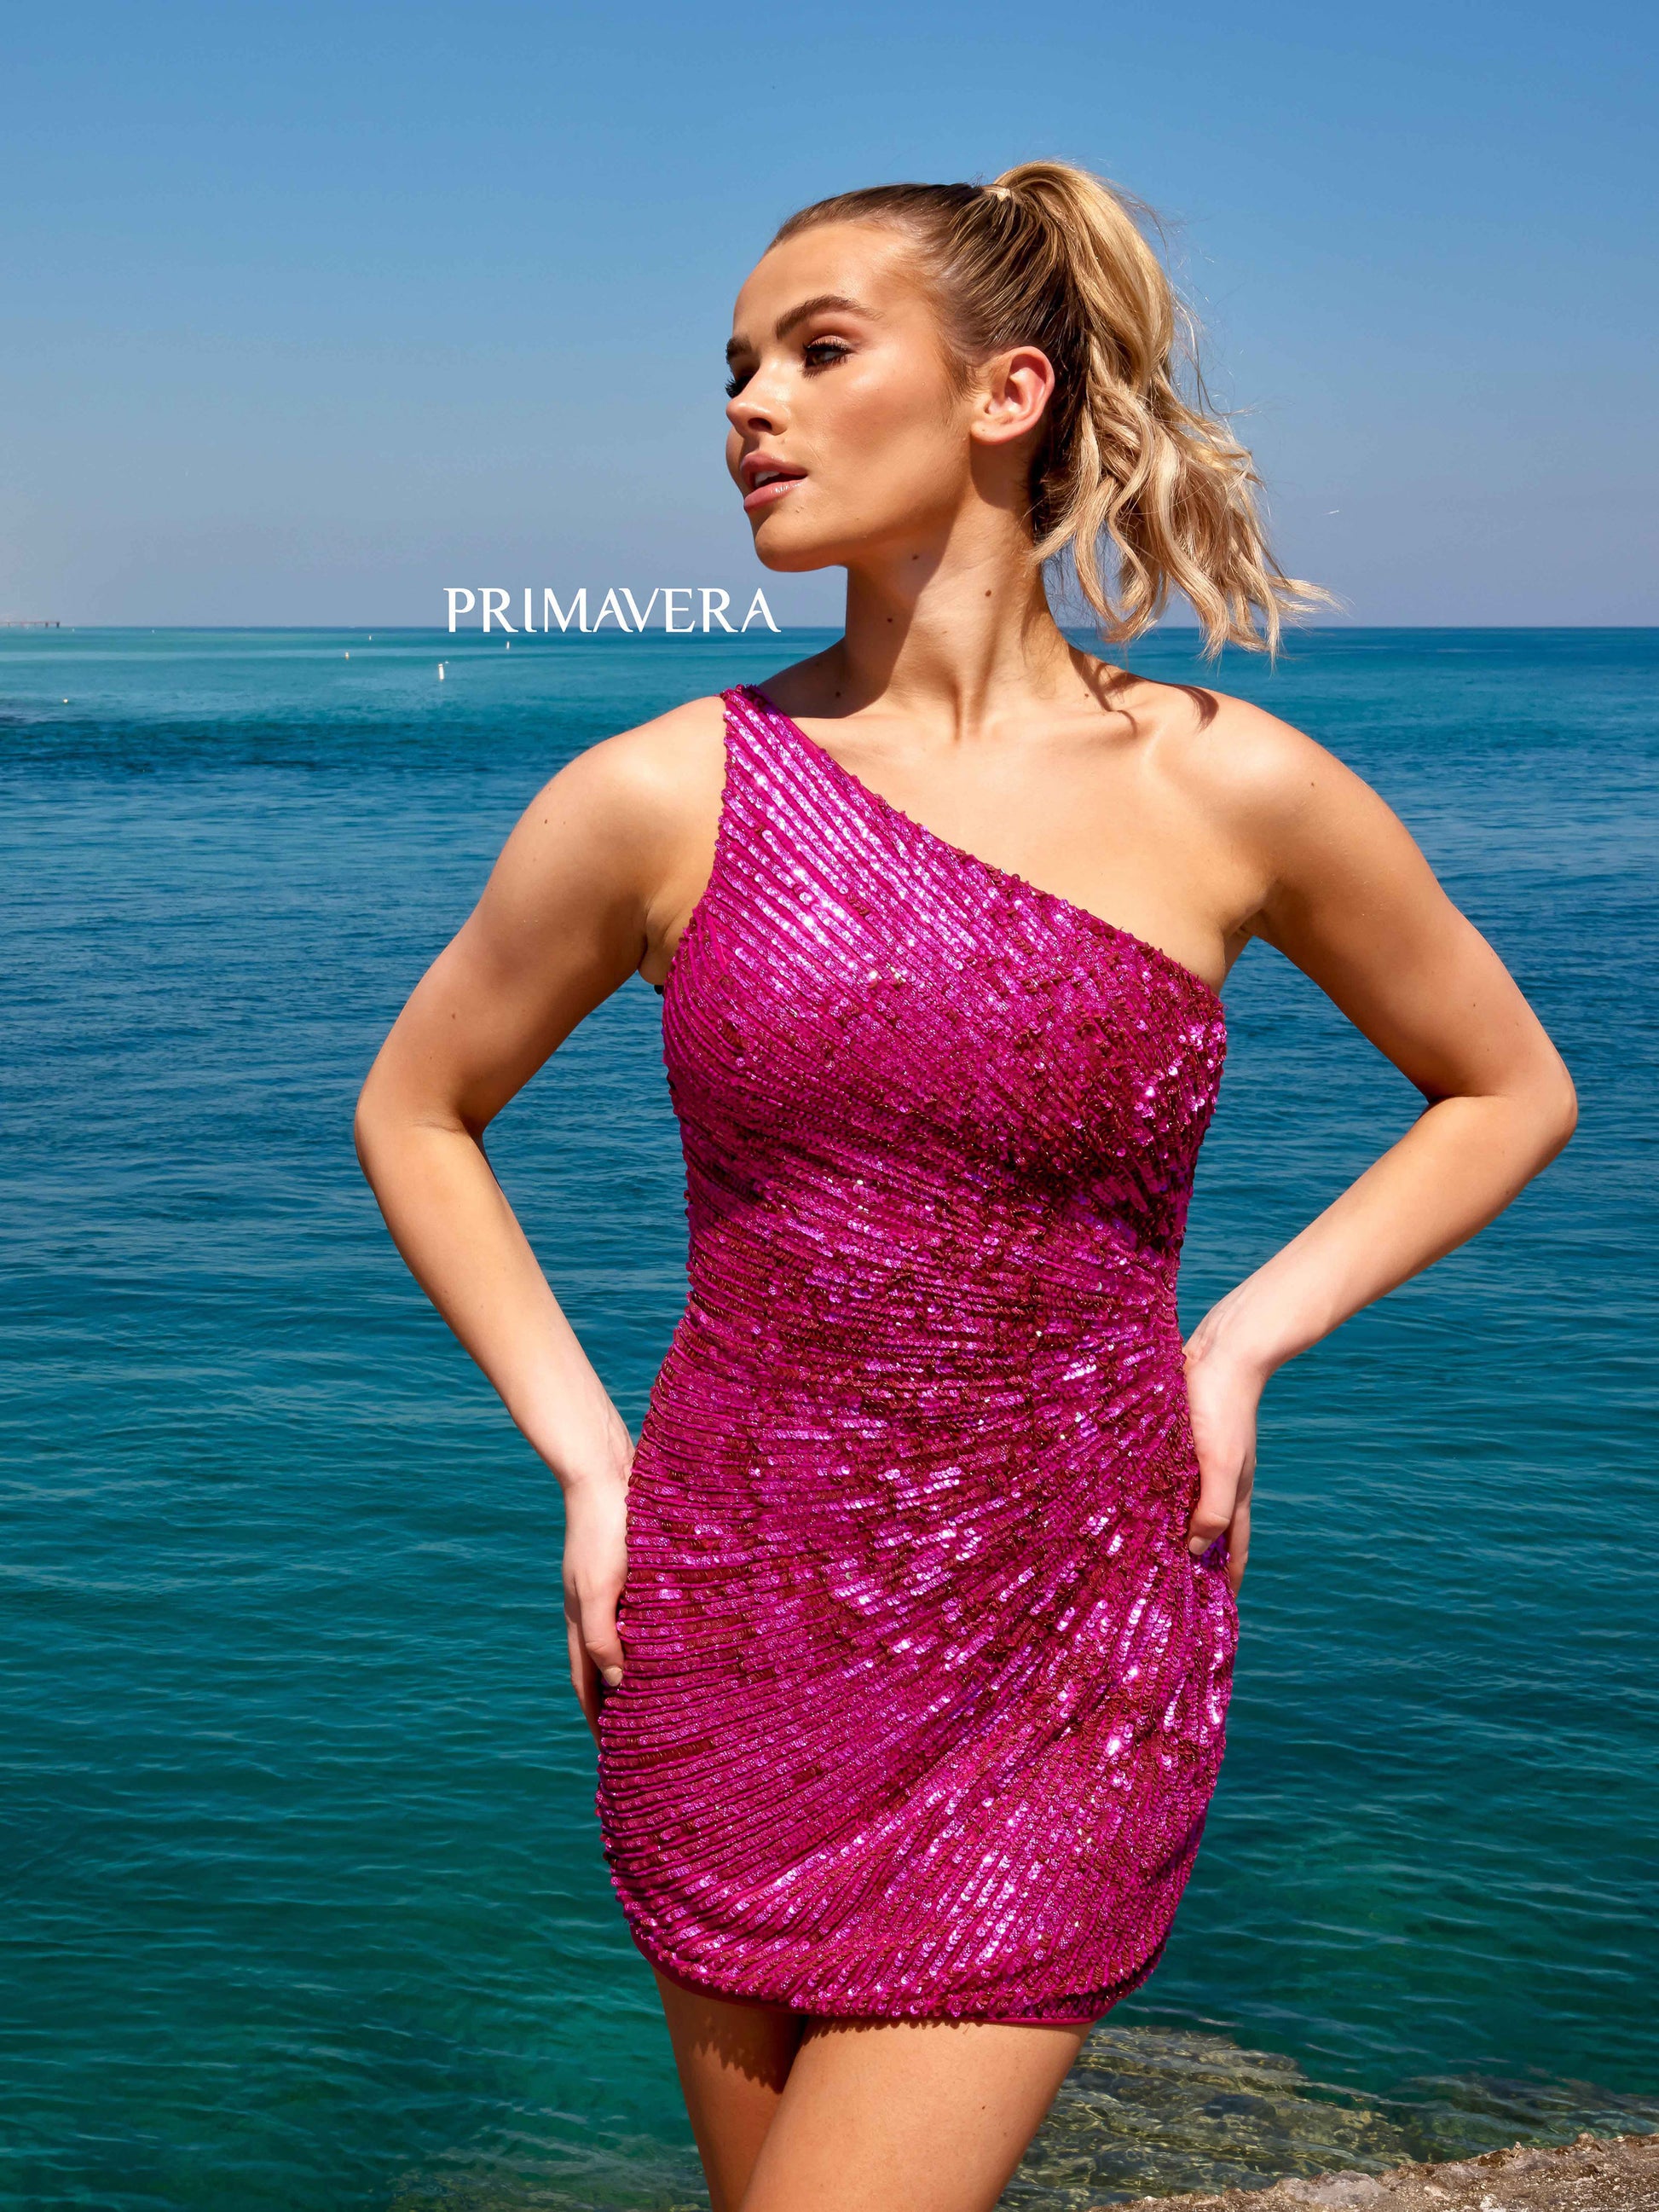 Primavera Couture 4055 Ruched Cocktail Dress Side One Shoulder Sequin And Beaded Line Design Homecoming Dress. This Primavera Couture 4055 Homecoming Dress adds just the right amount of sparkle with a multi-dimensional sequin and beaded line design. The